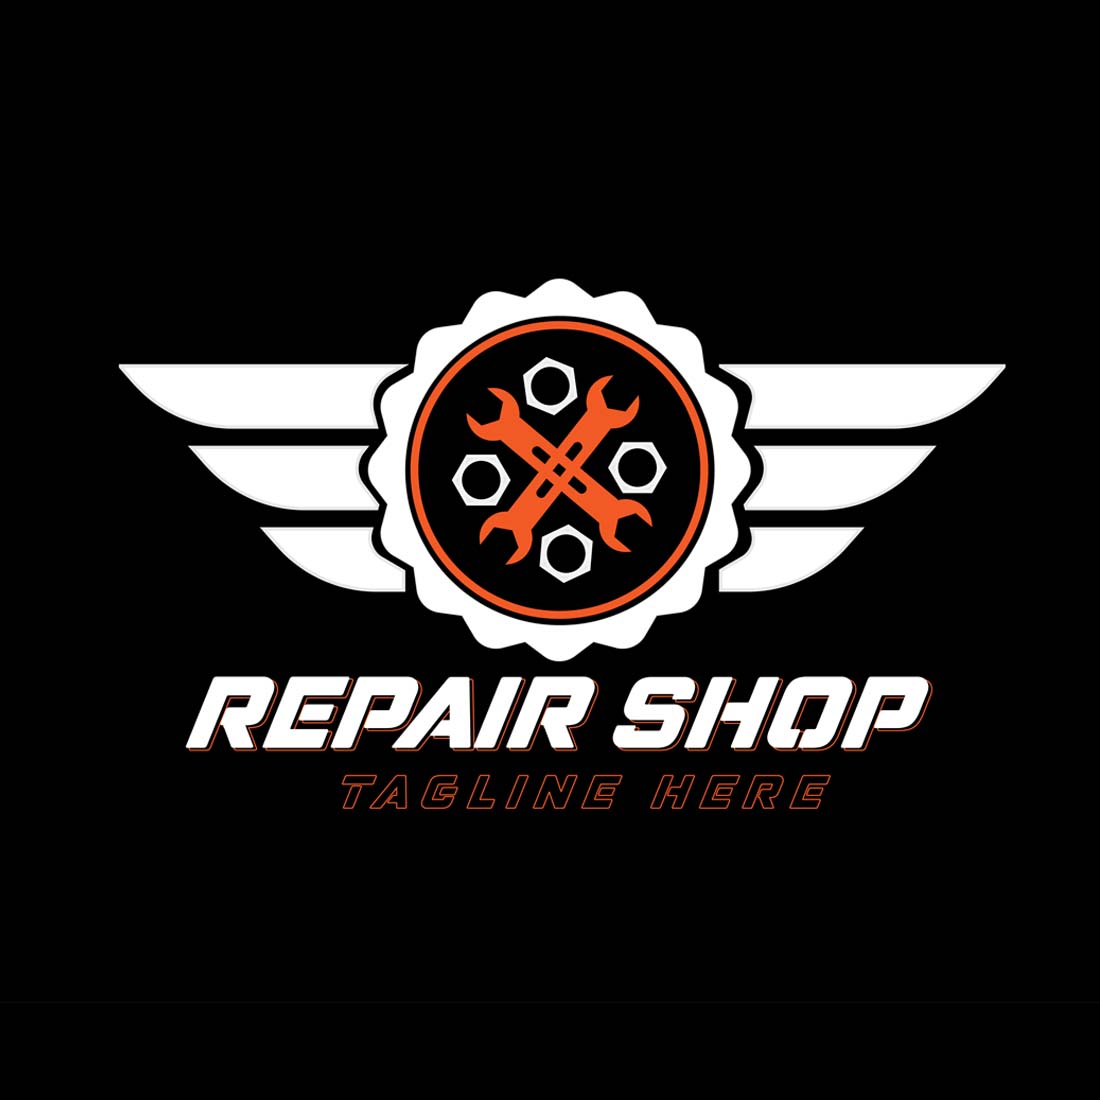 Repair shop logo can be used in 100% editable AI EPS, JPEG, PNG format preview image.